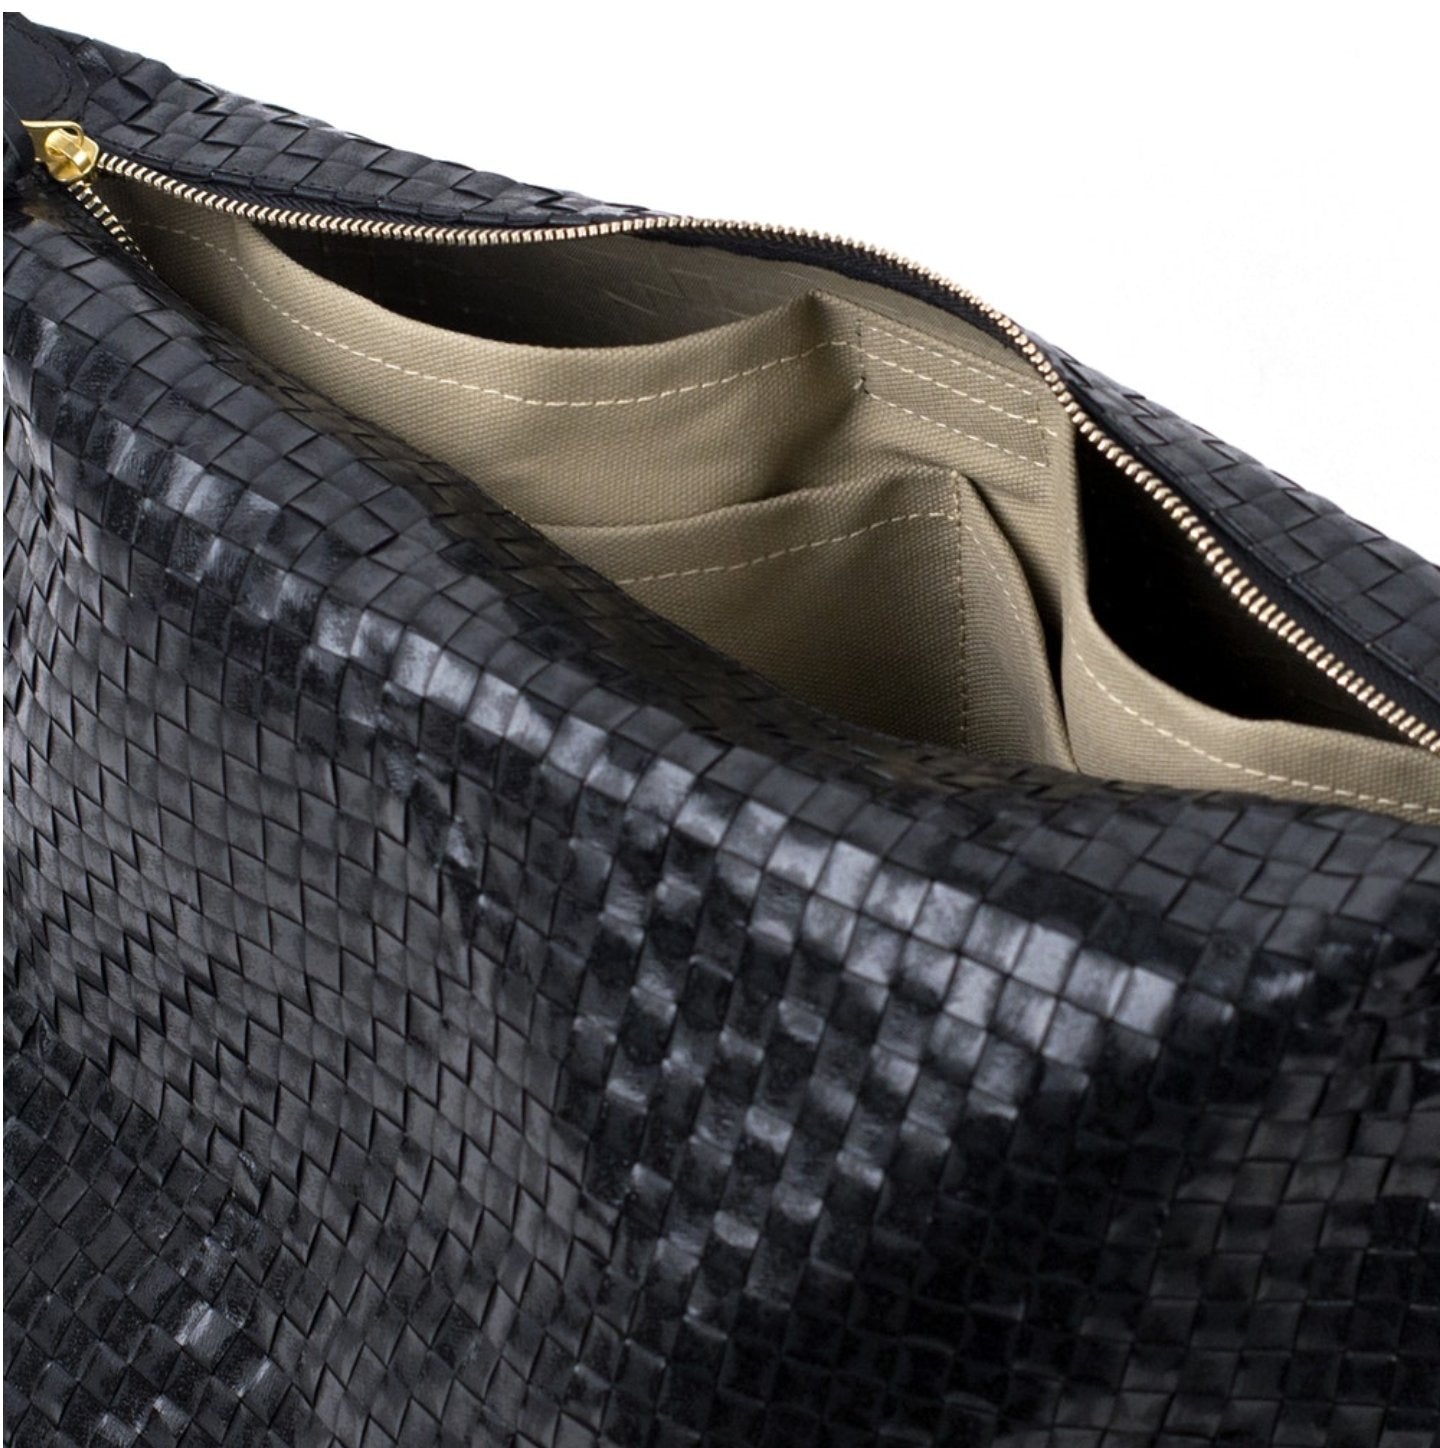 A black woven washable paper tote bag is shown close up from a top angle. It is unzipped to reveal interior pockets in a beige cotton with white stitching.